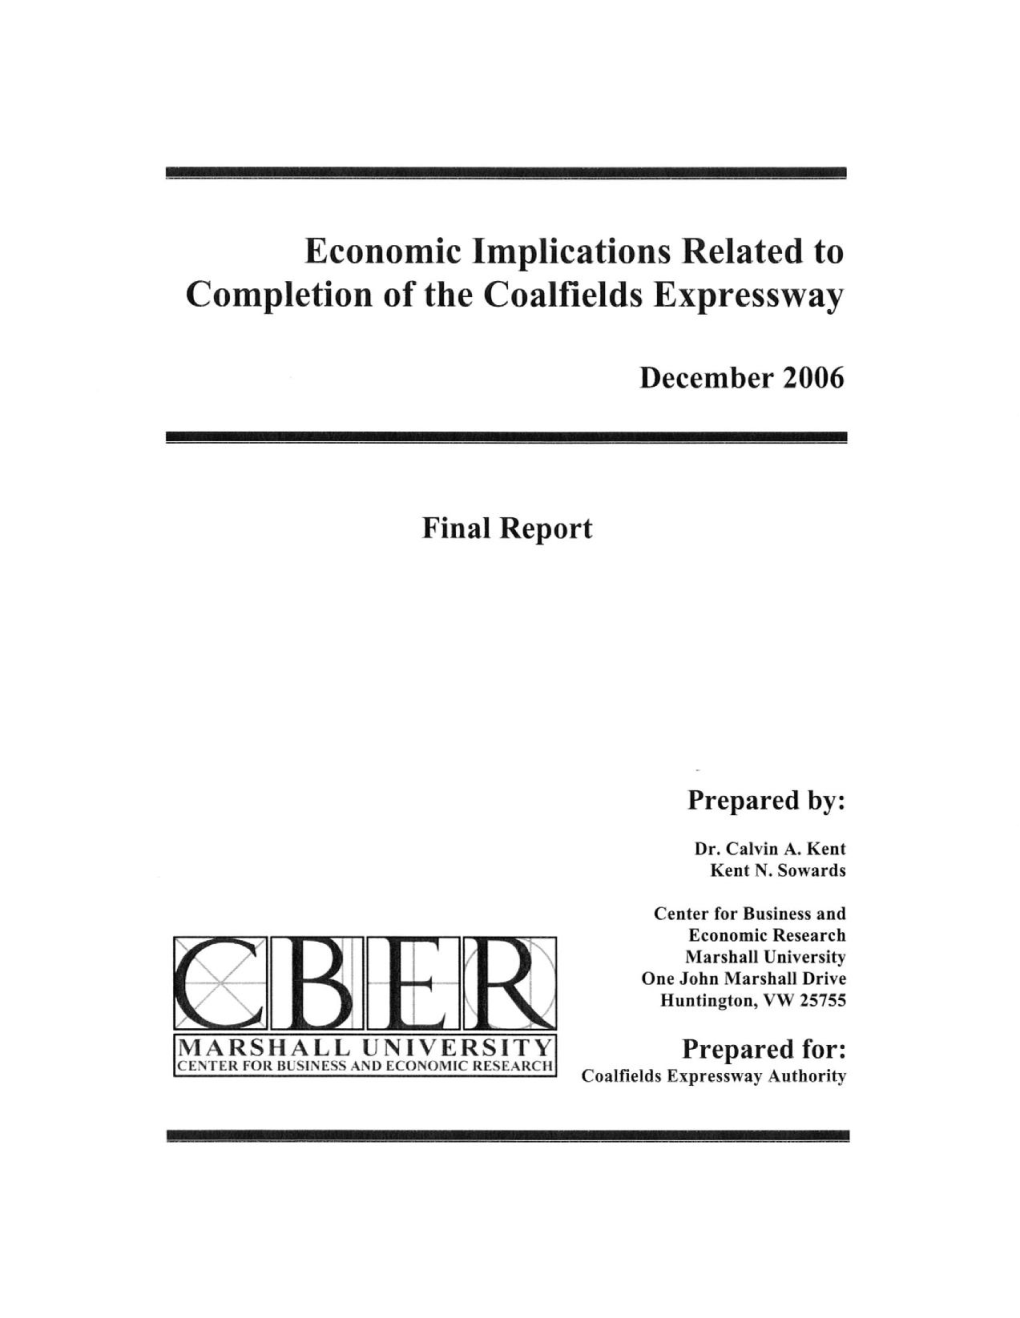 Economic Implications Related to Completion of the Coalfields Expressway